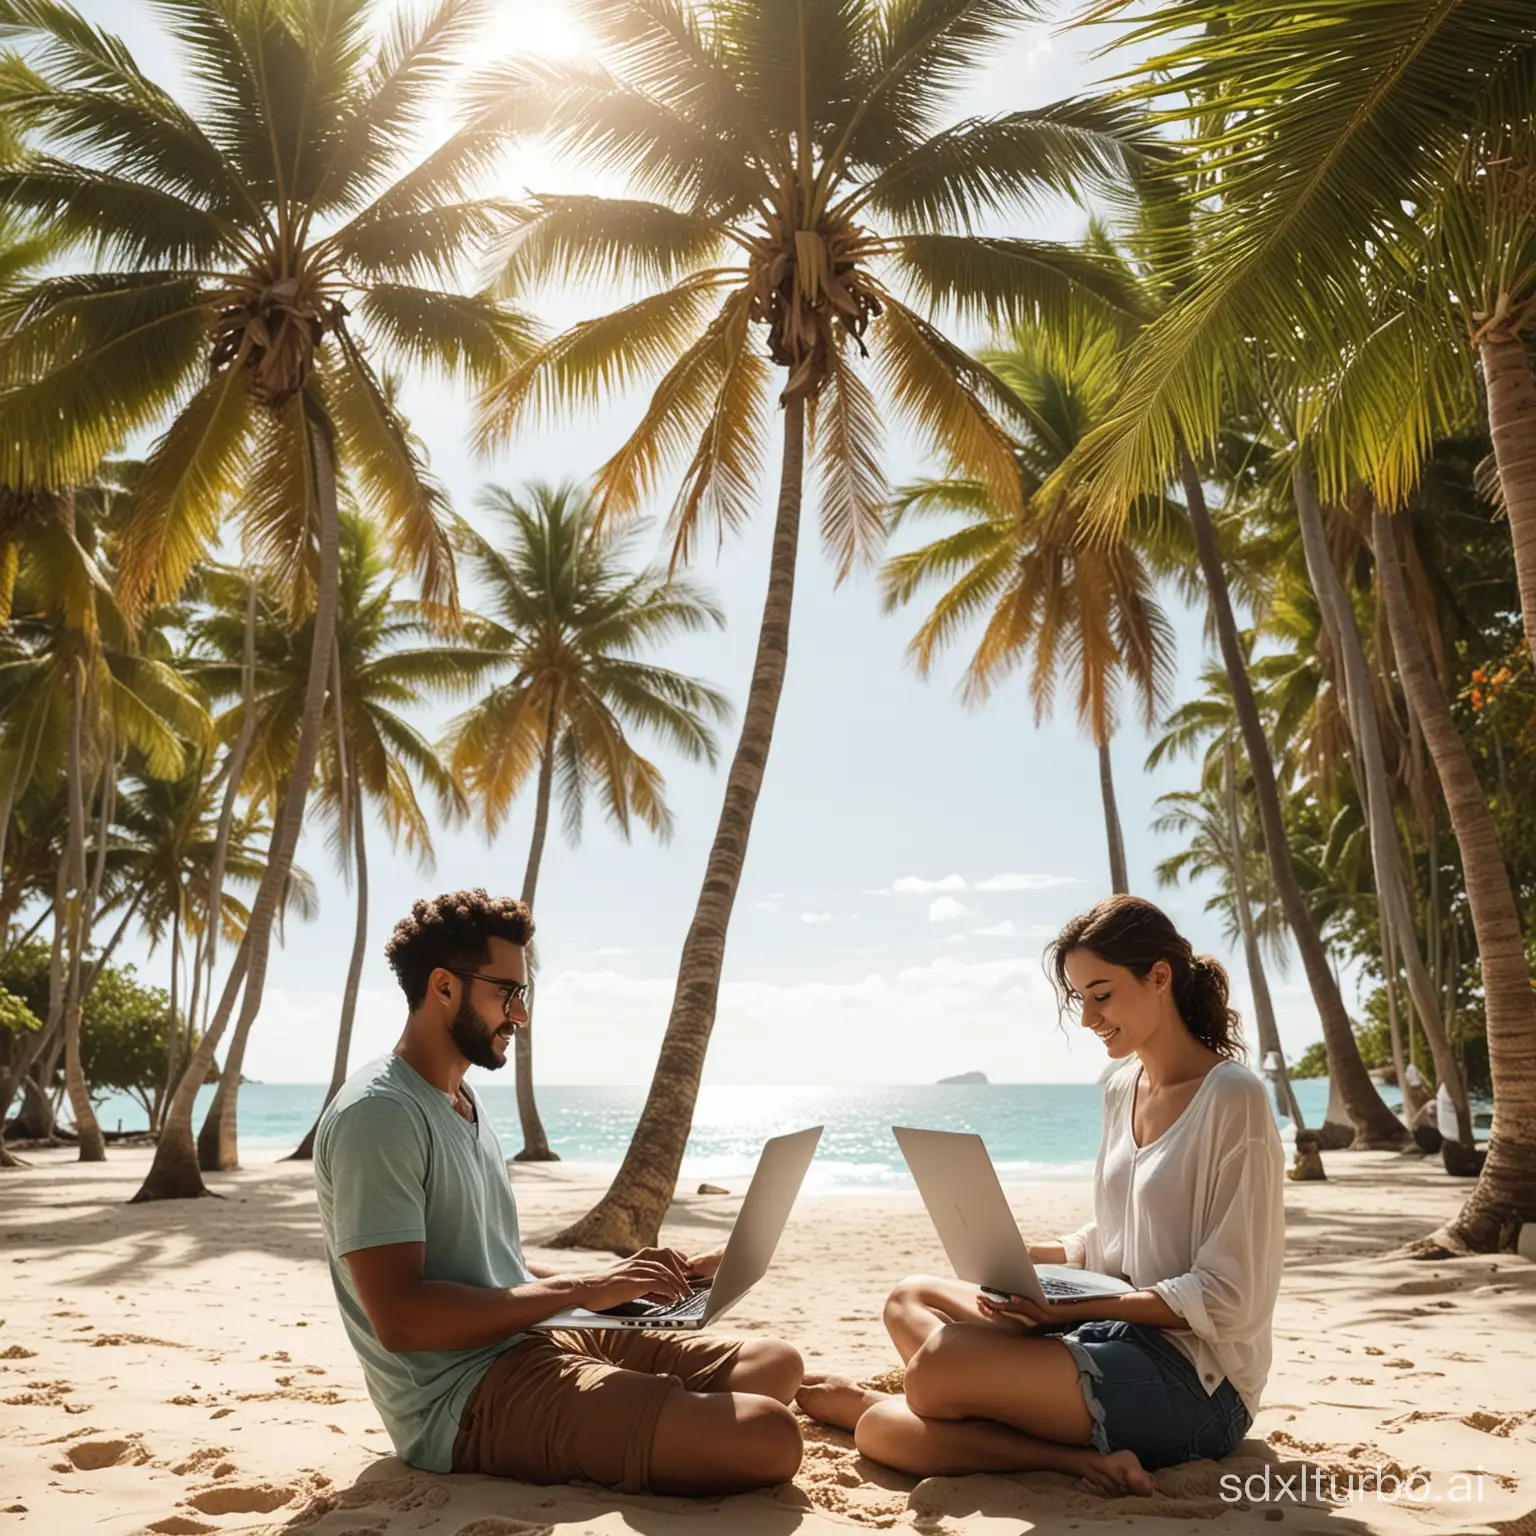 Produce an image of a freelancer working from a laptop on a tropical beach, illustrating the freedom and flexibility that online earning provides, with palm trees swaying in the background.